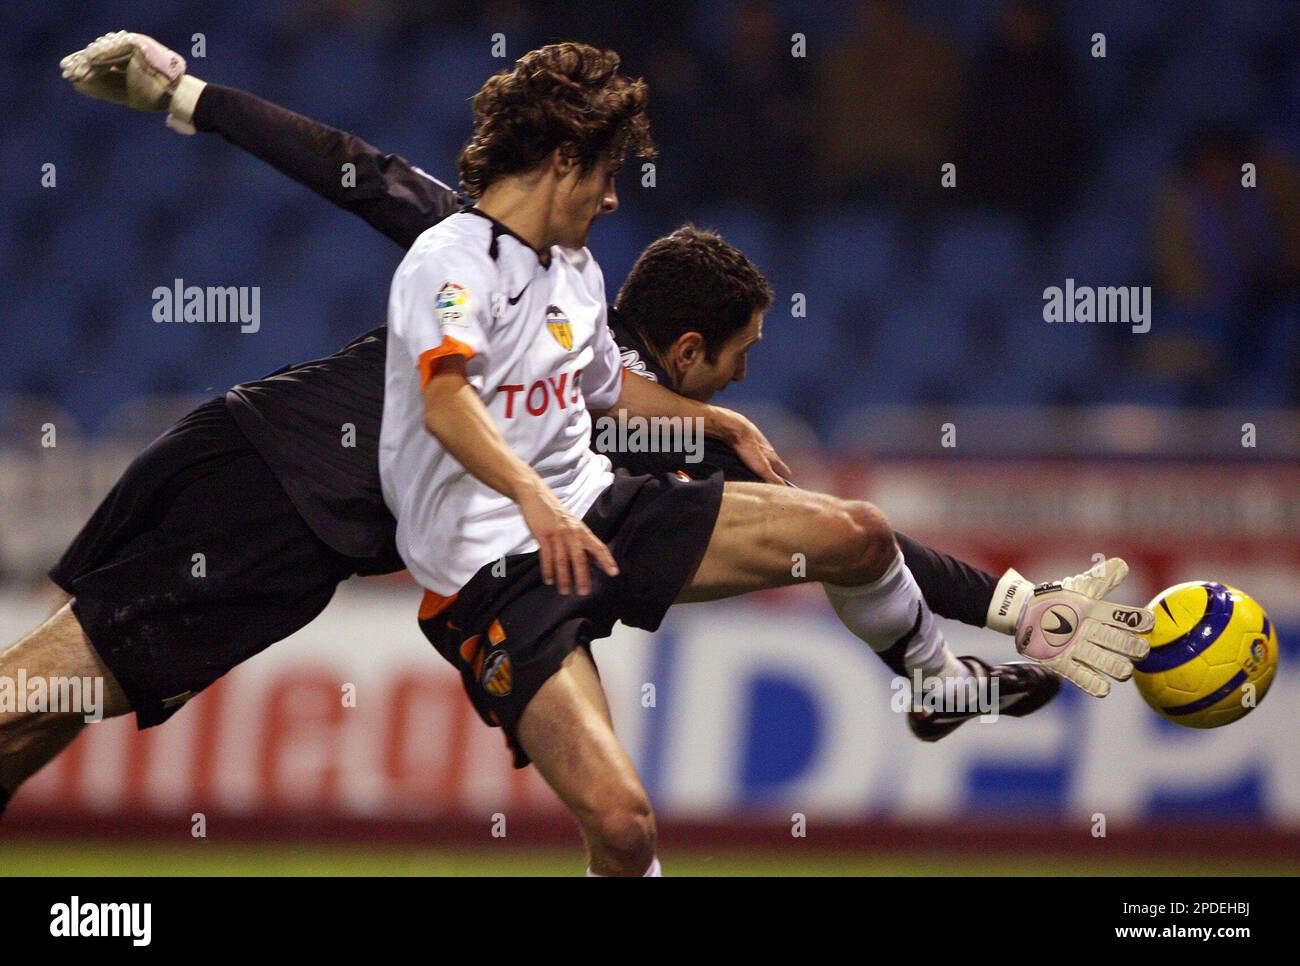 Deportivo's goalkeeper Francisco Molina, left, grabs the ball from  Valencia's Argentinian striker Carlos Aimar during a first-leg soccer match  of the Copa del Rey quarterfinals in La Coruna, Spain, Thursday, Jan. 19,